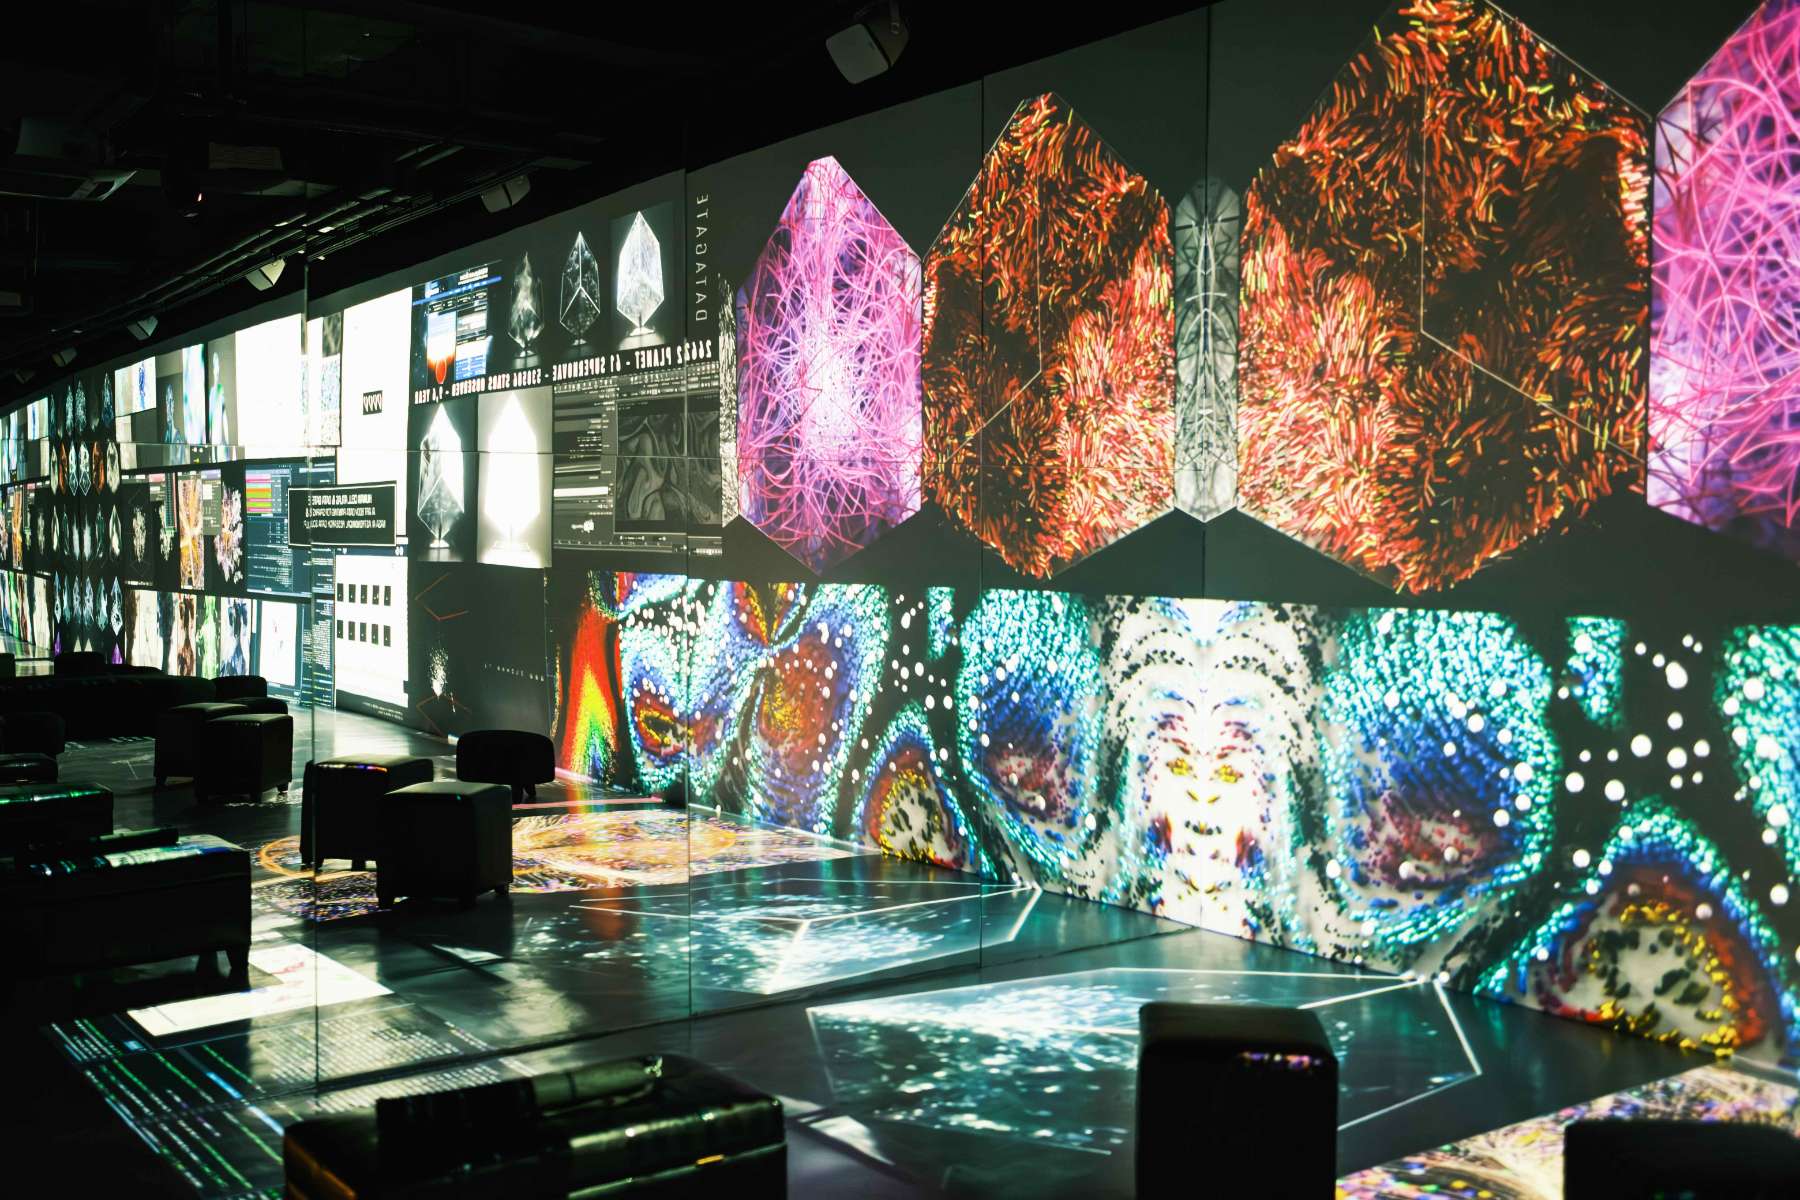 Experience a World of Colors with the “Wisdom of Da Vinci” at BGC